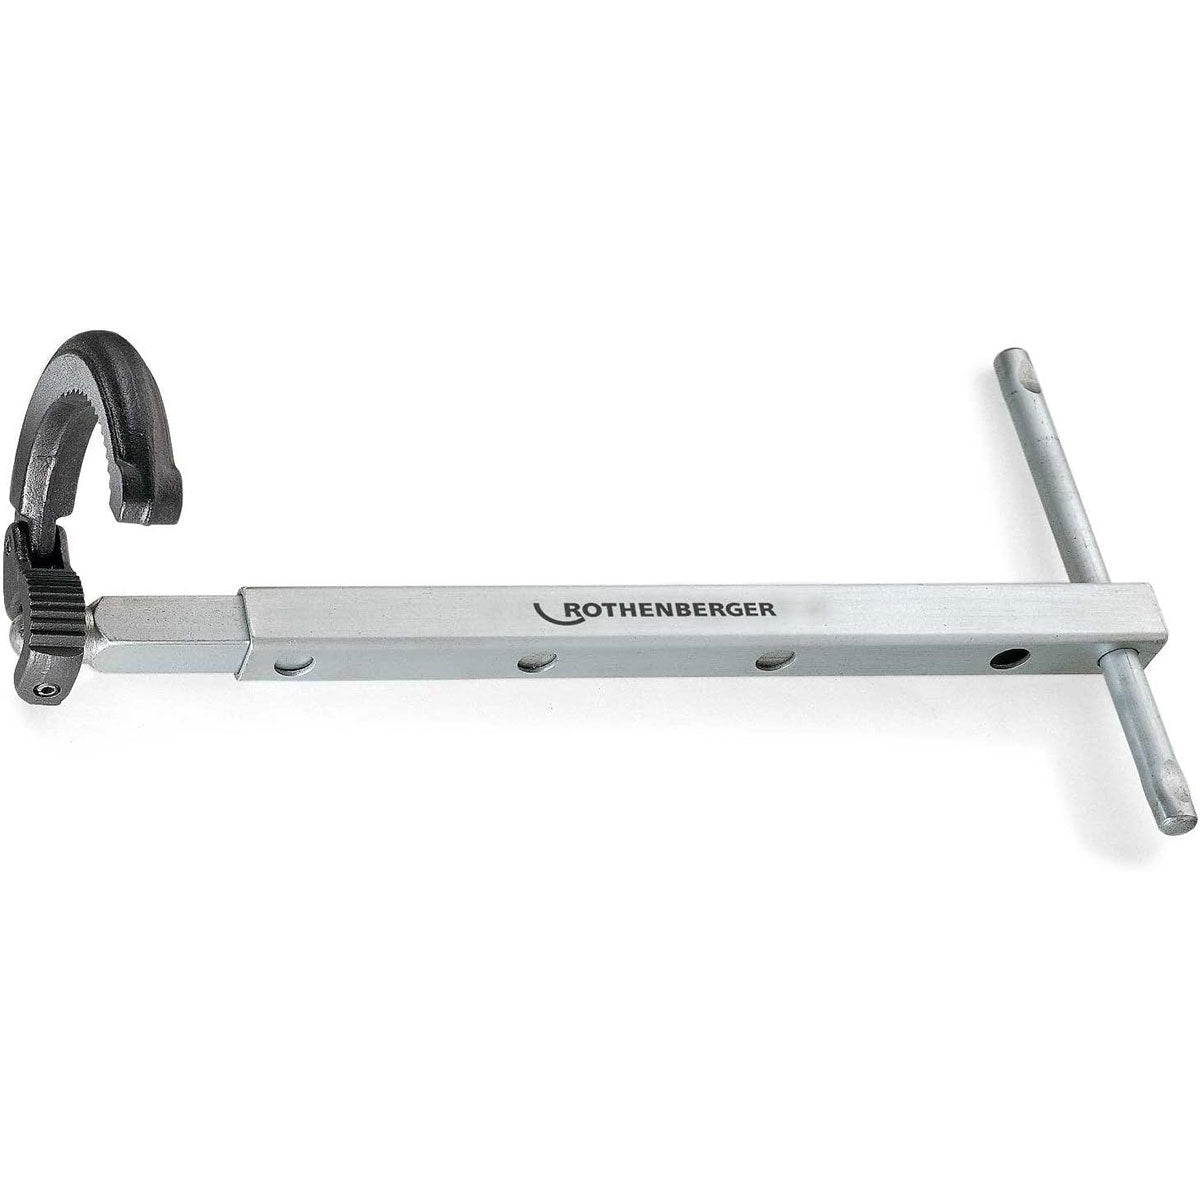 Rothenberger 19599 Telescopic Basin Wrench 20-48mm